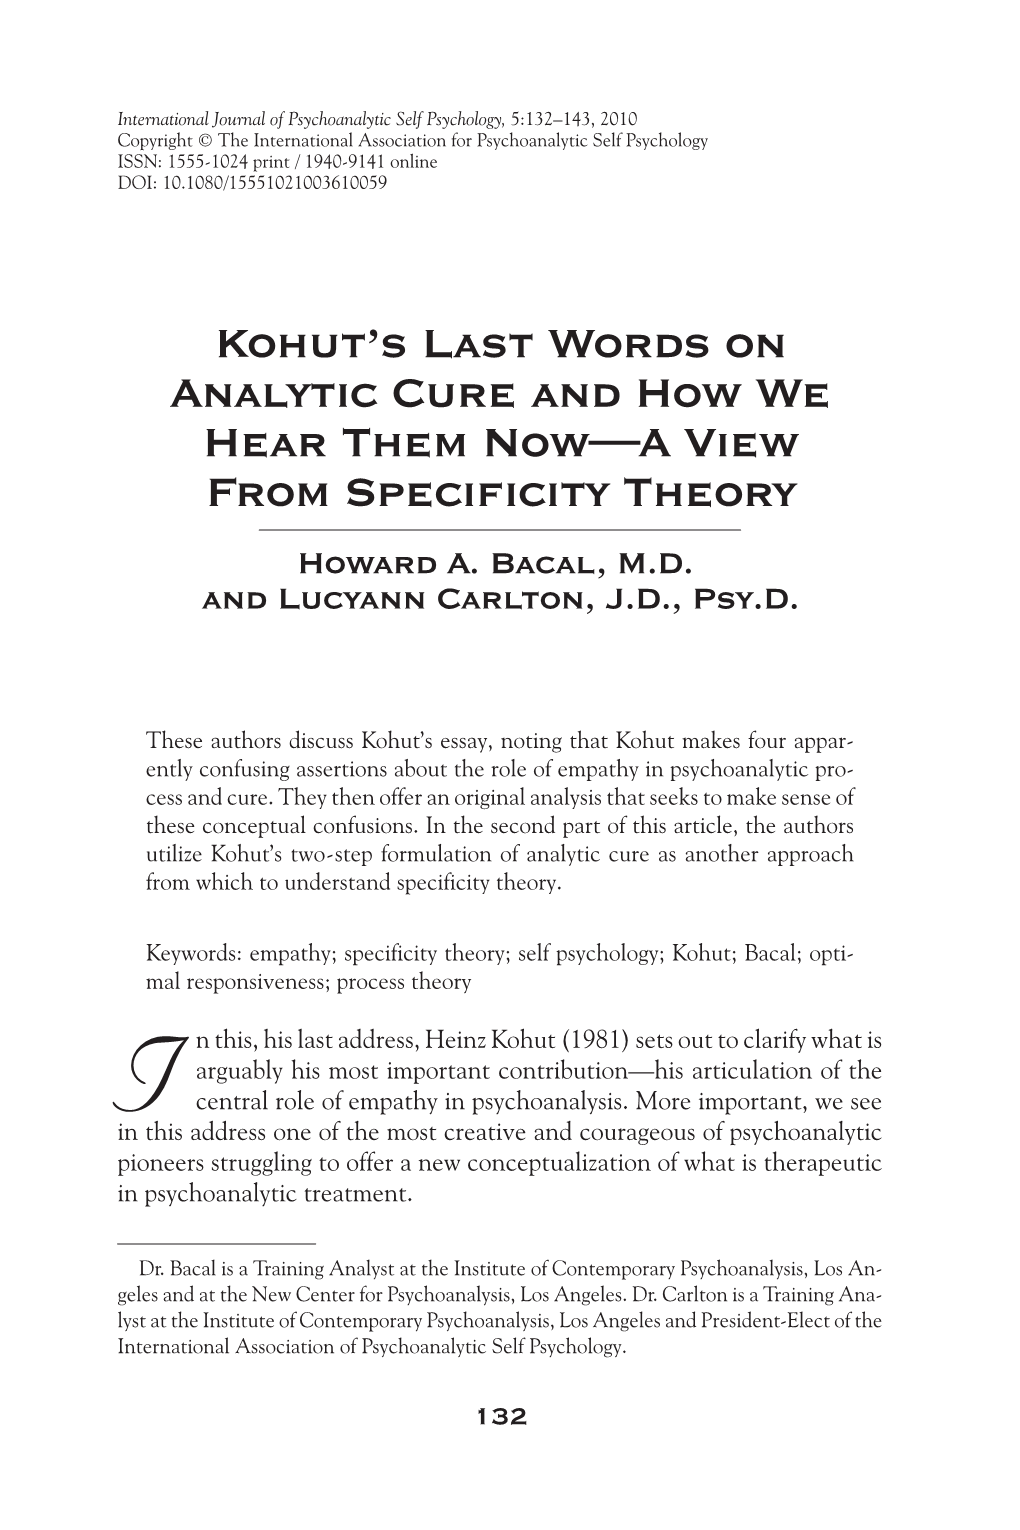 Kohut's Last Words on Analytic Cure and How We Hear Them Now—A